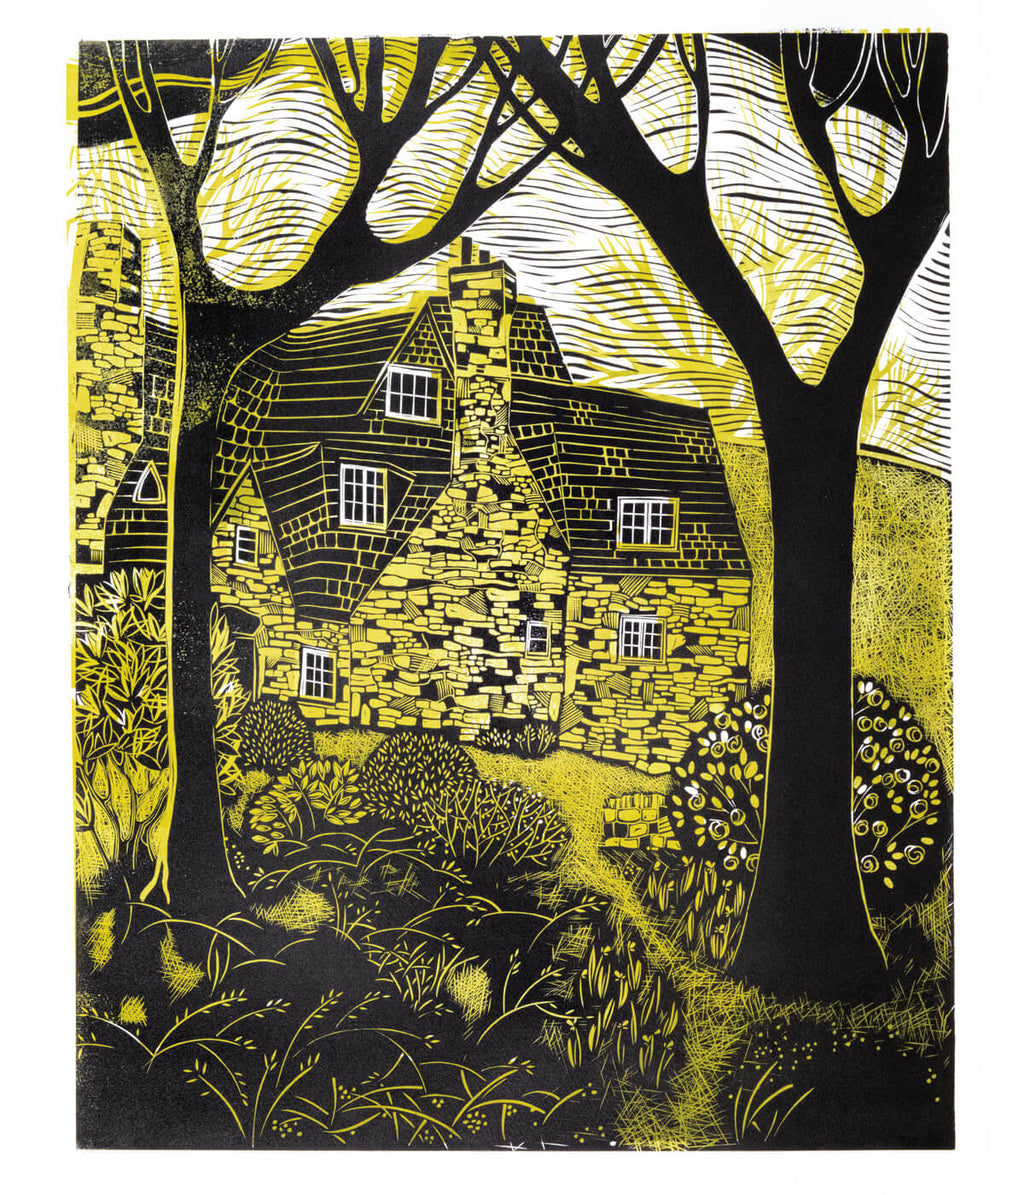 Stoneywell From The Woods, a linocut print by Sarah Kirby